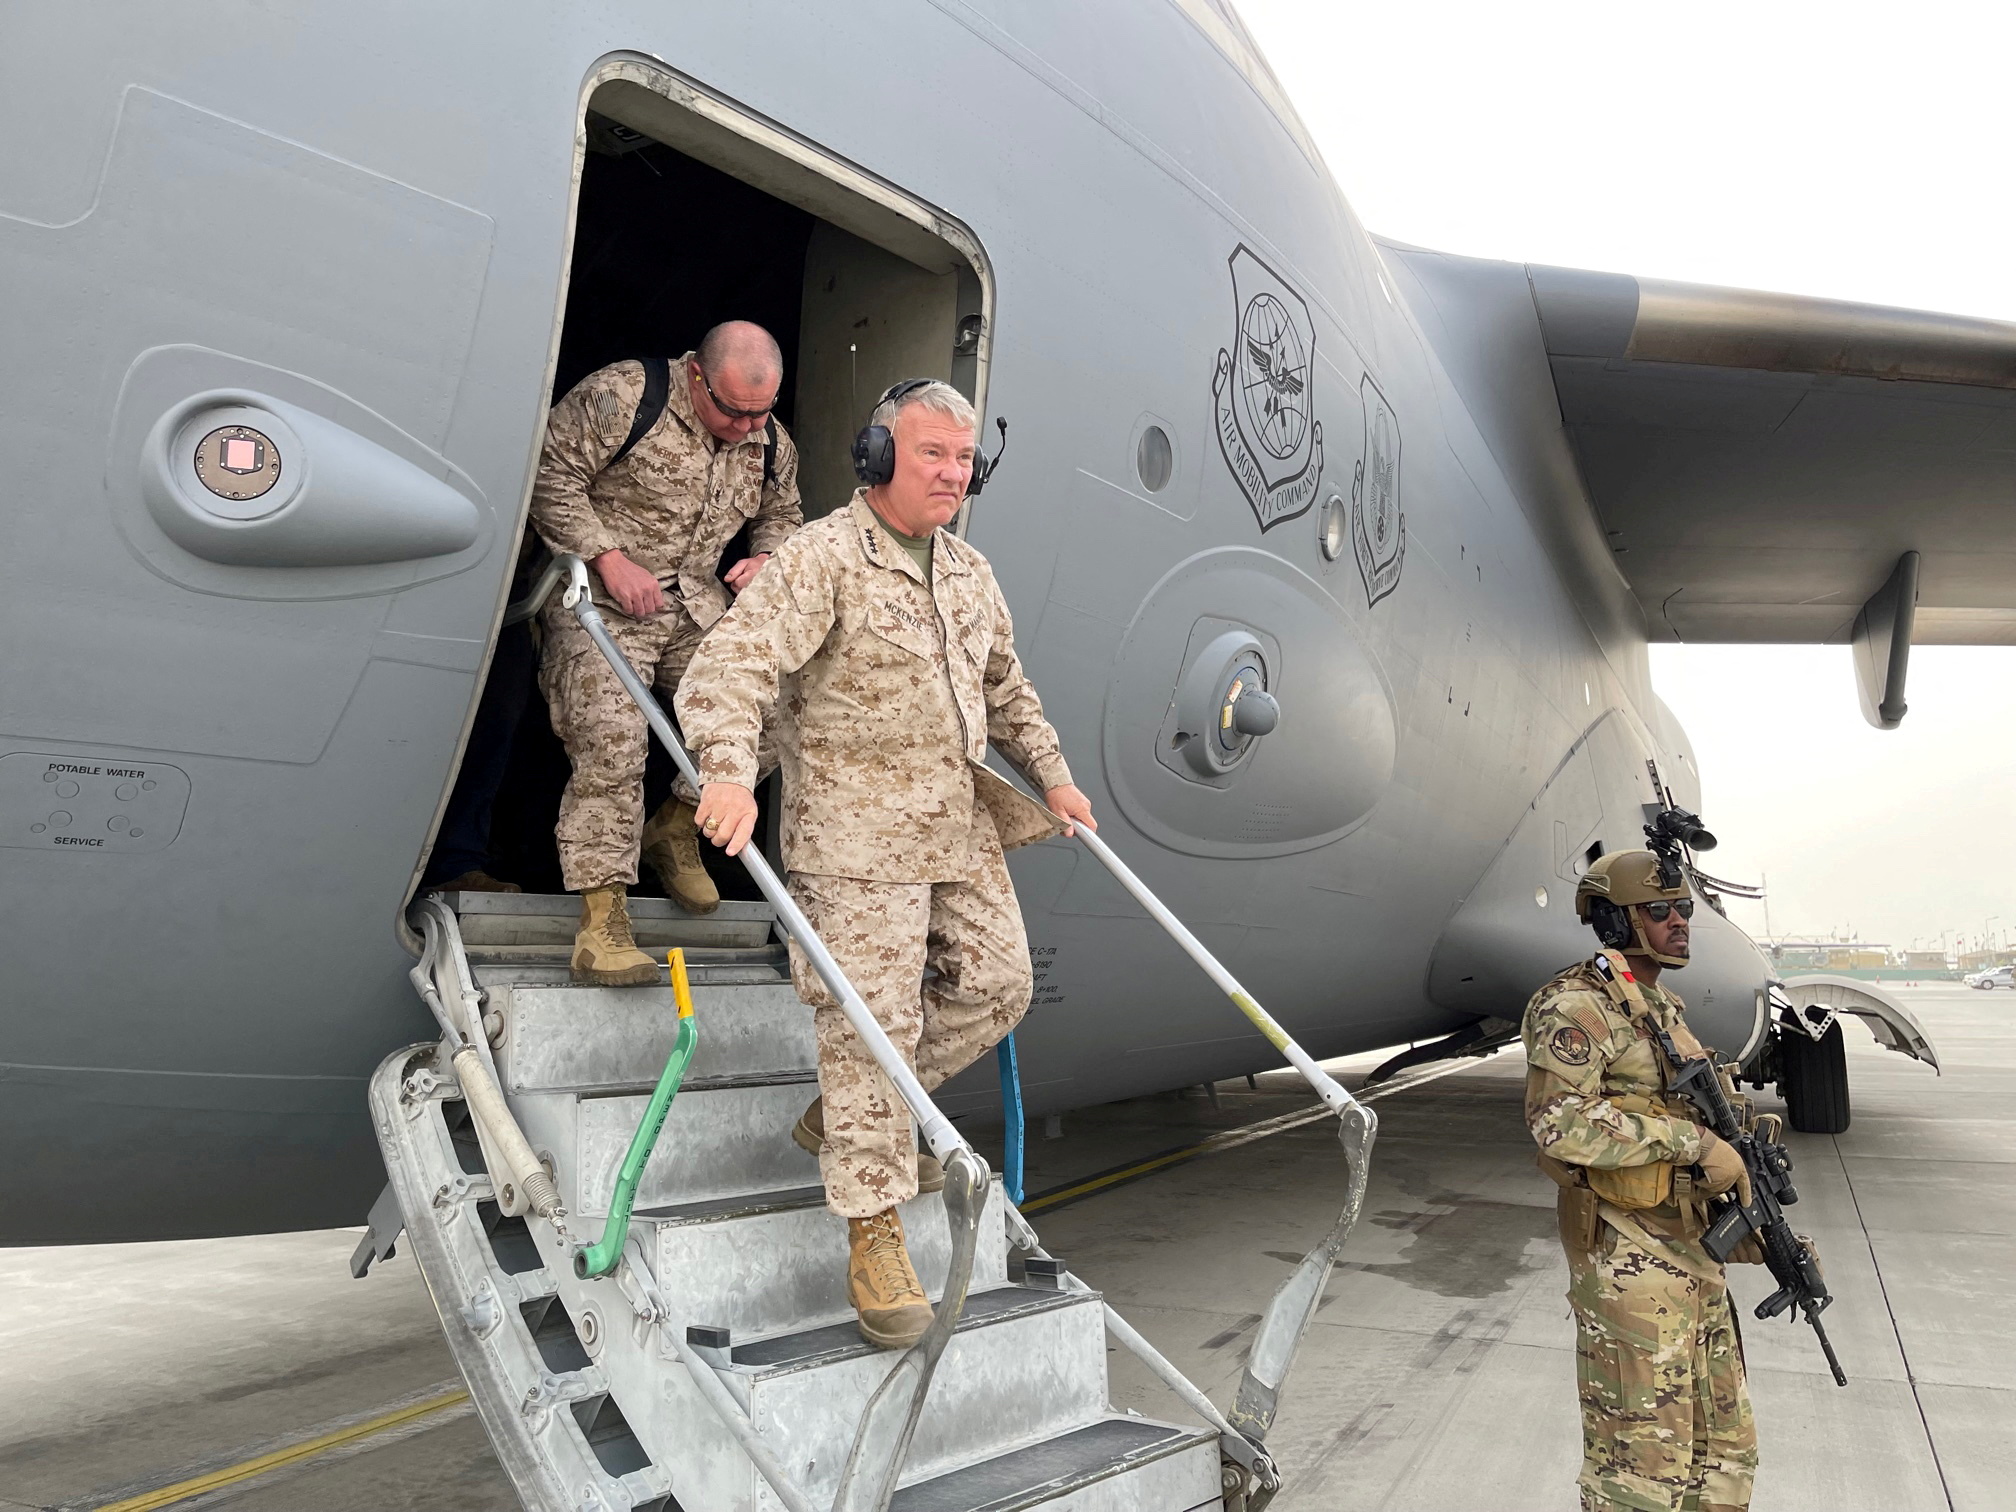 U.S. Marine Corps Gen. Frank McKenzie, the commander of U.S. Central Command, arrives at Hamid Karzai International Airport, in Kabul, Afghanistan